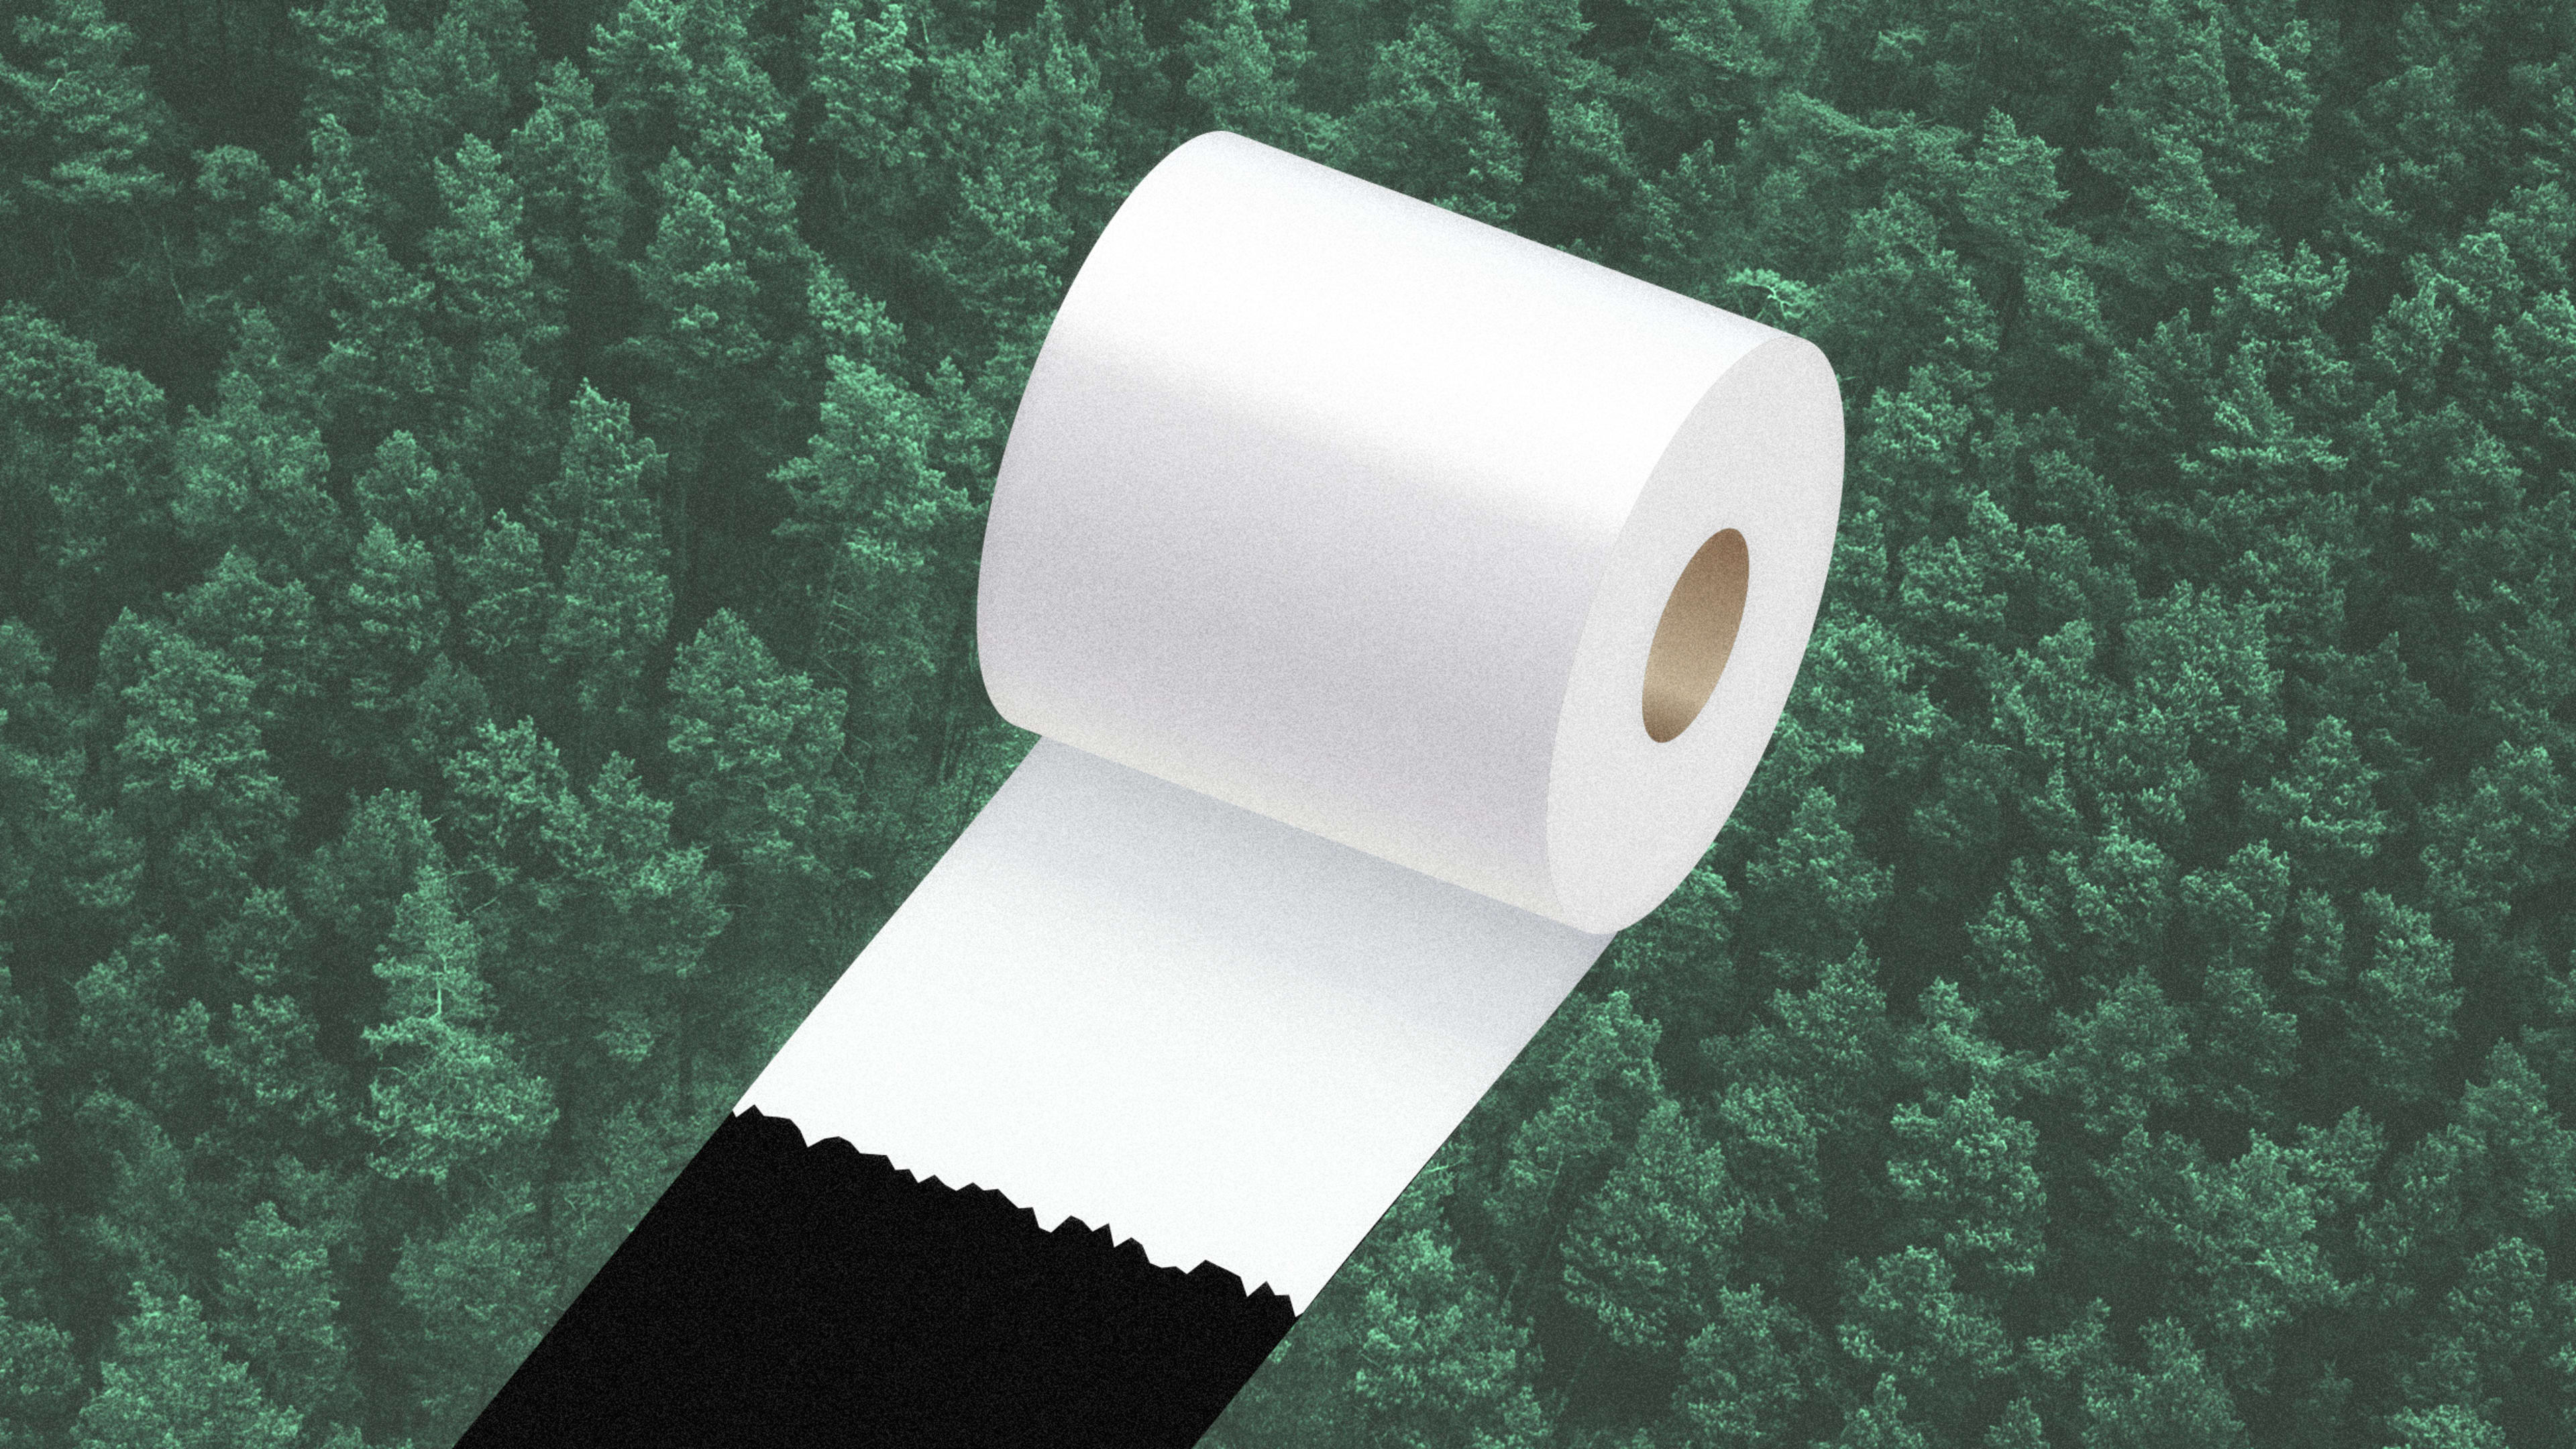 There’s an overlooked product that you definitely use that’s destroying vital forests